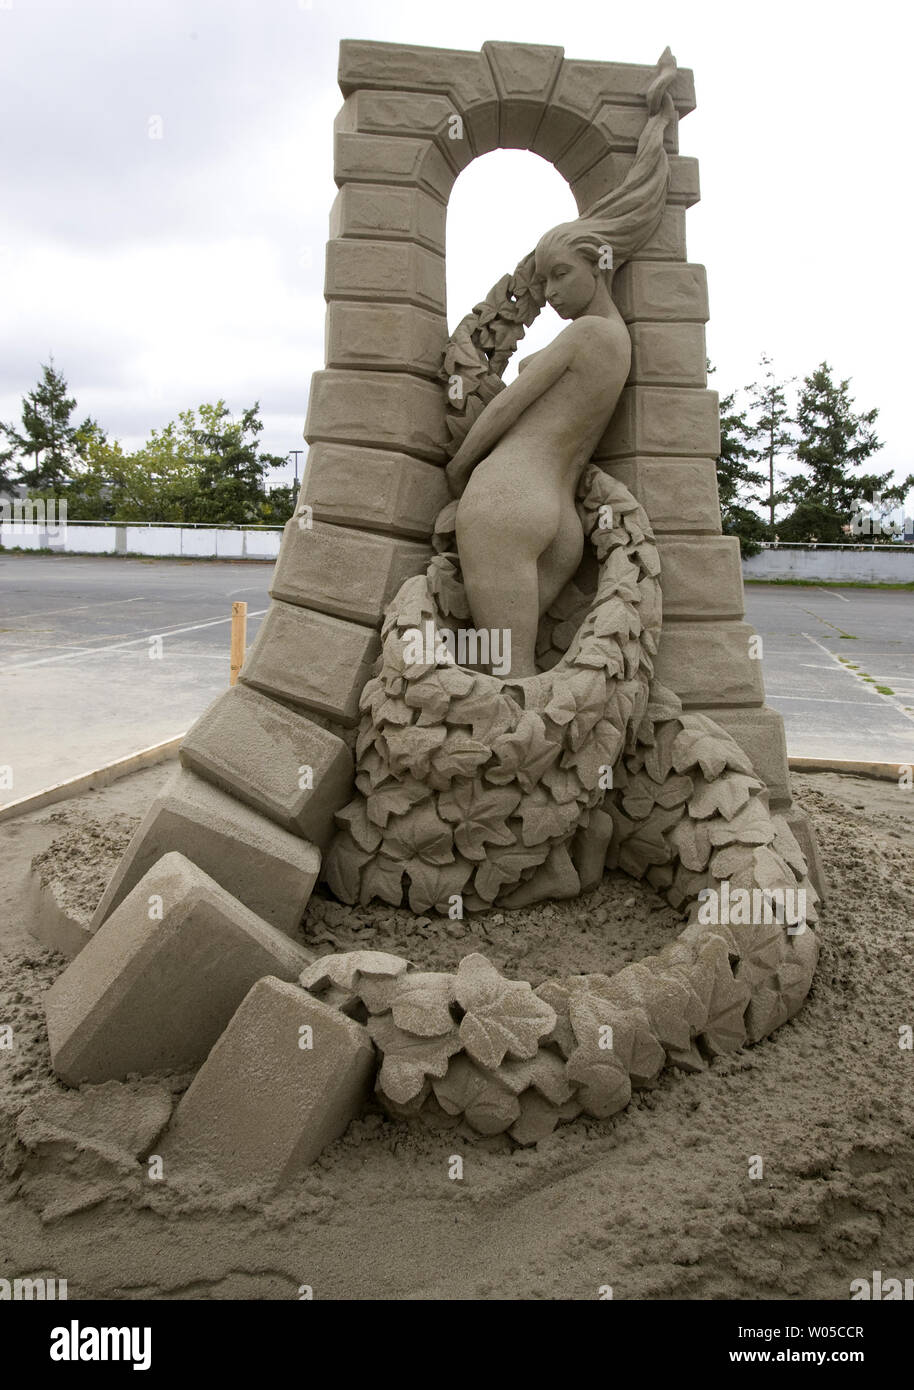 Whirlwind" created by Thomas Koet, from the Netherlands, took 1st Place in  the Solo Division at the World Champion Sand Sculpture Championships held  in Federal Way, Washington on October 2, 2010. 63